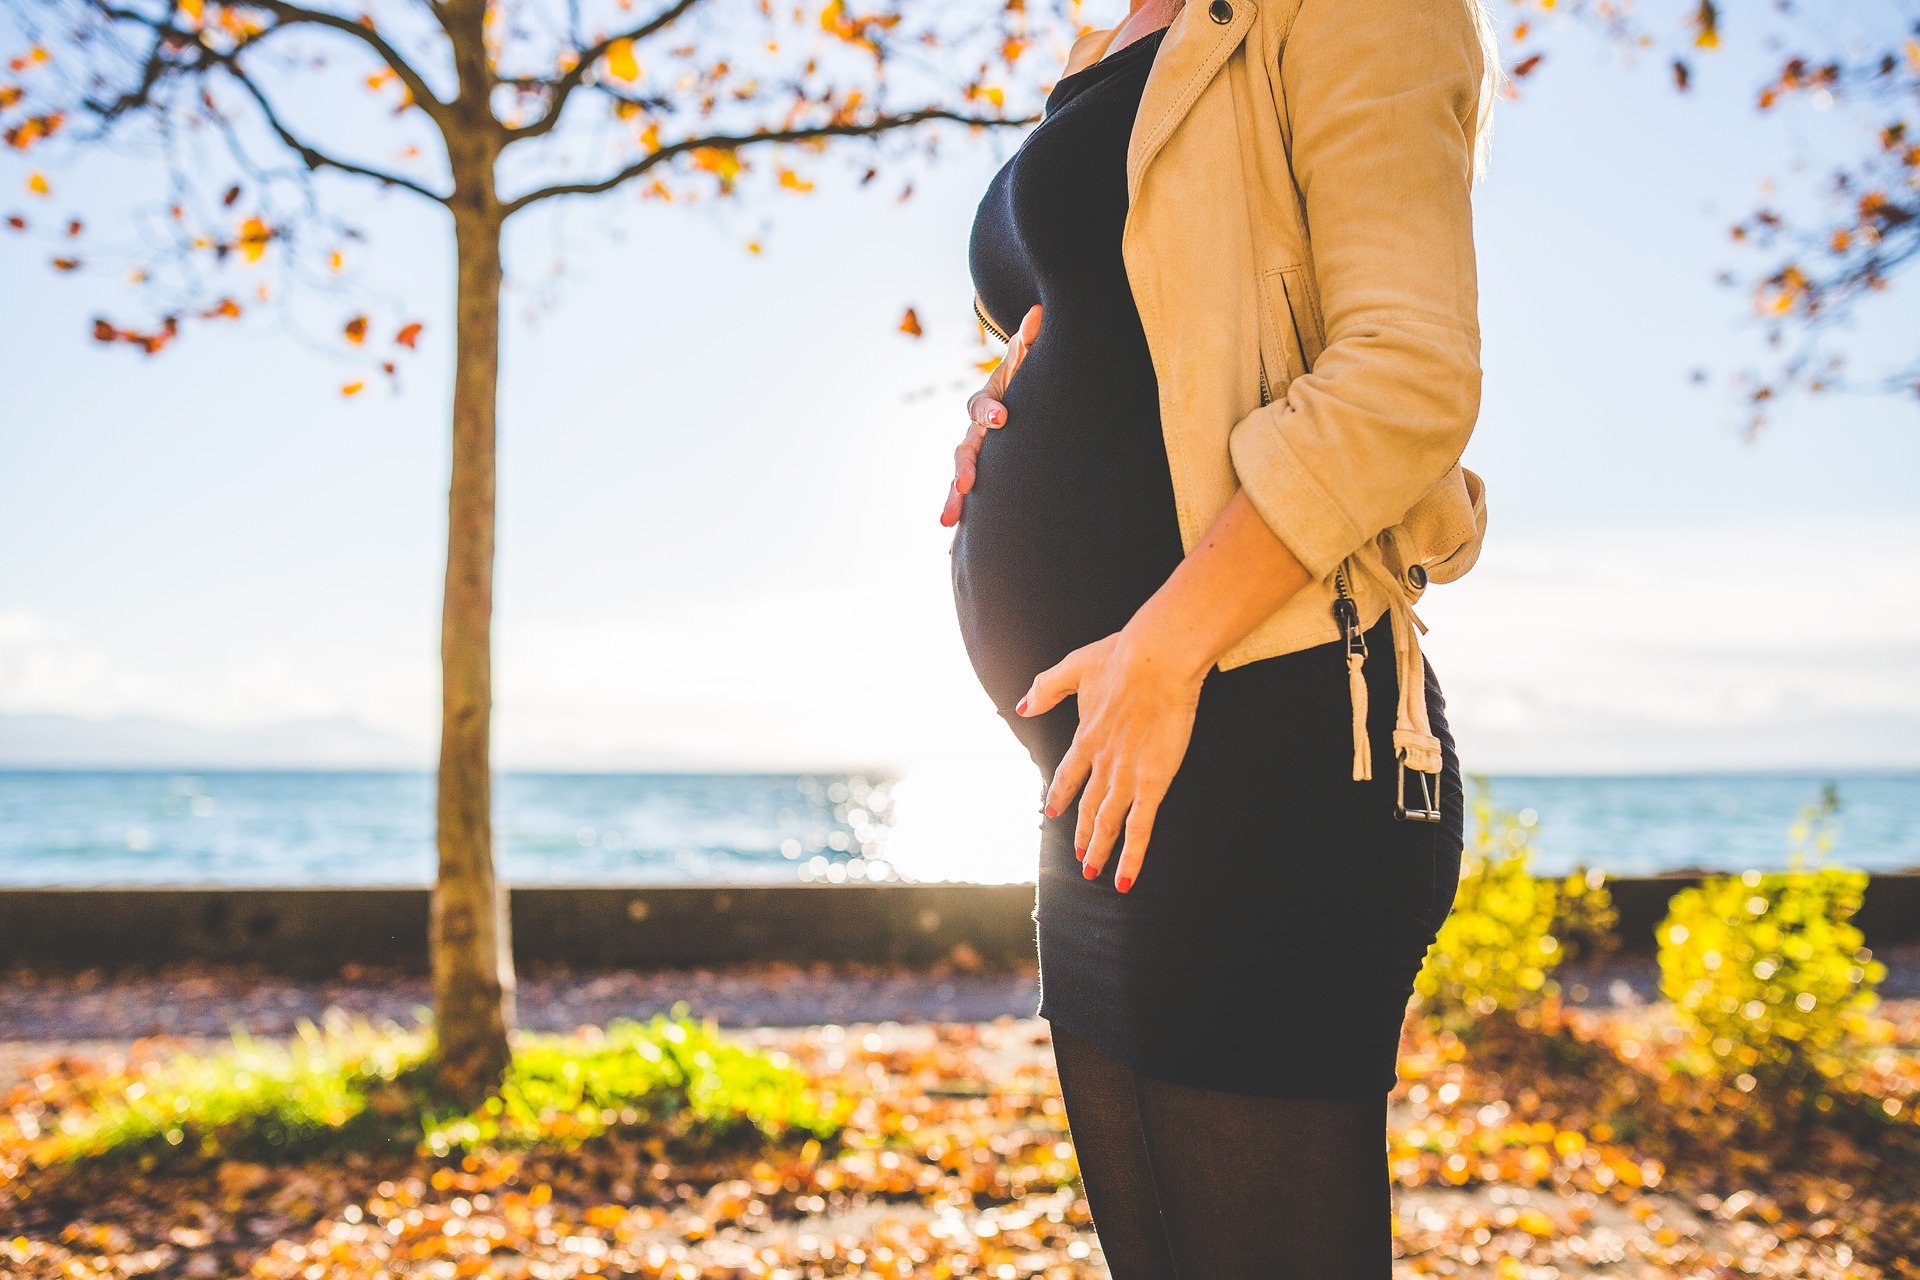 THIRD TRIMESTER AND ITS COMMON SYMPTOMS